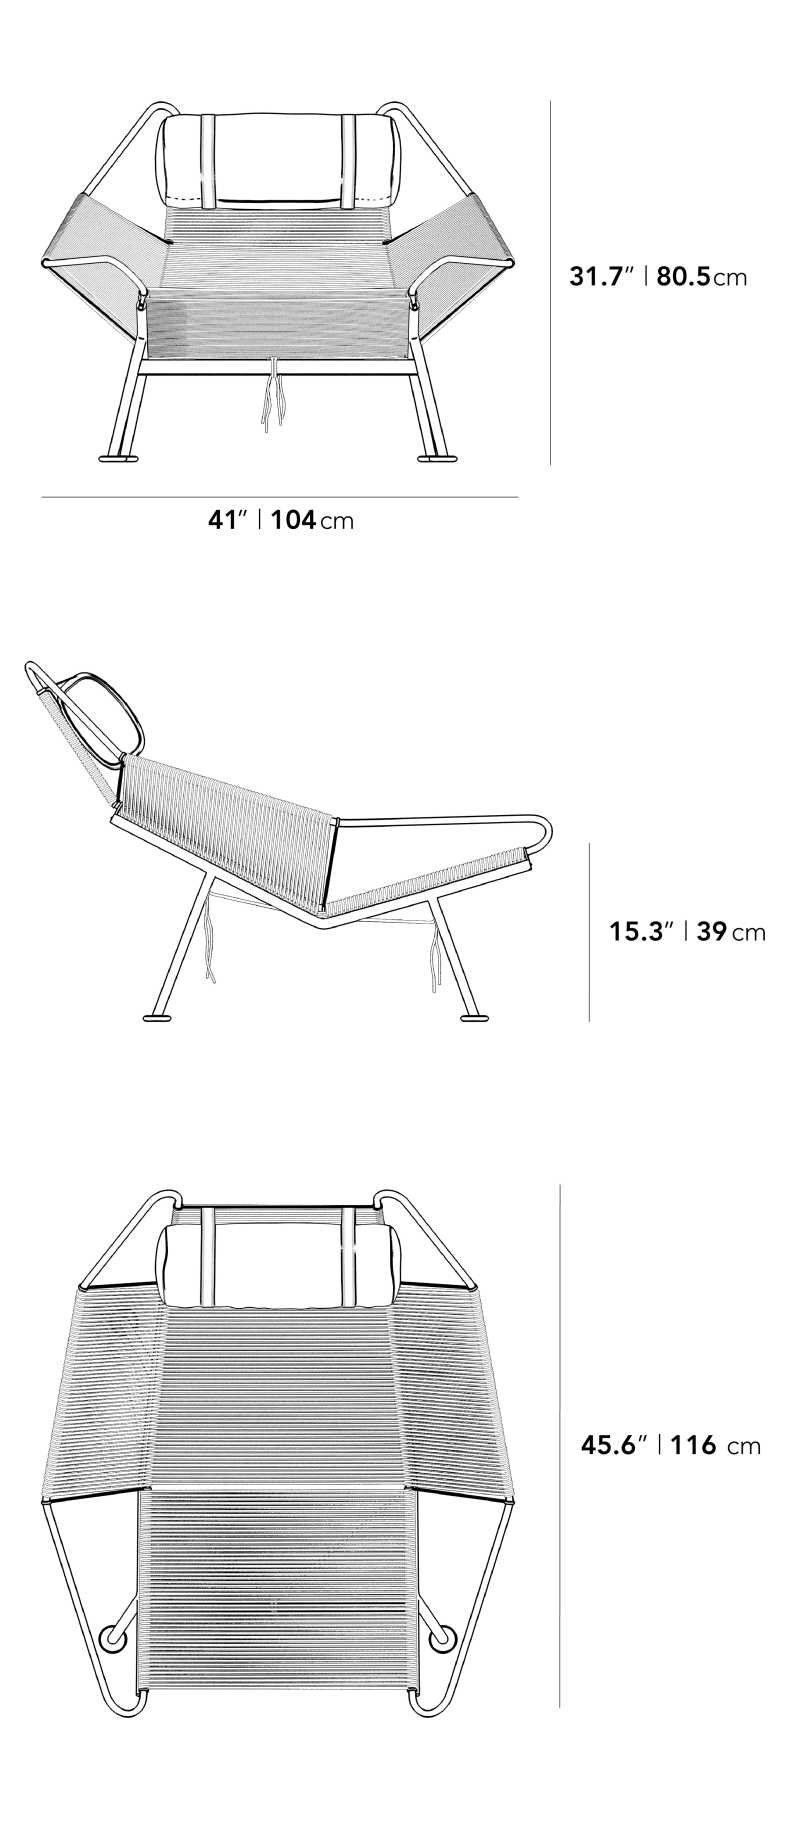 Dimensions for Flag Halyard Chair